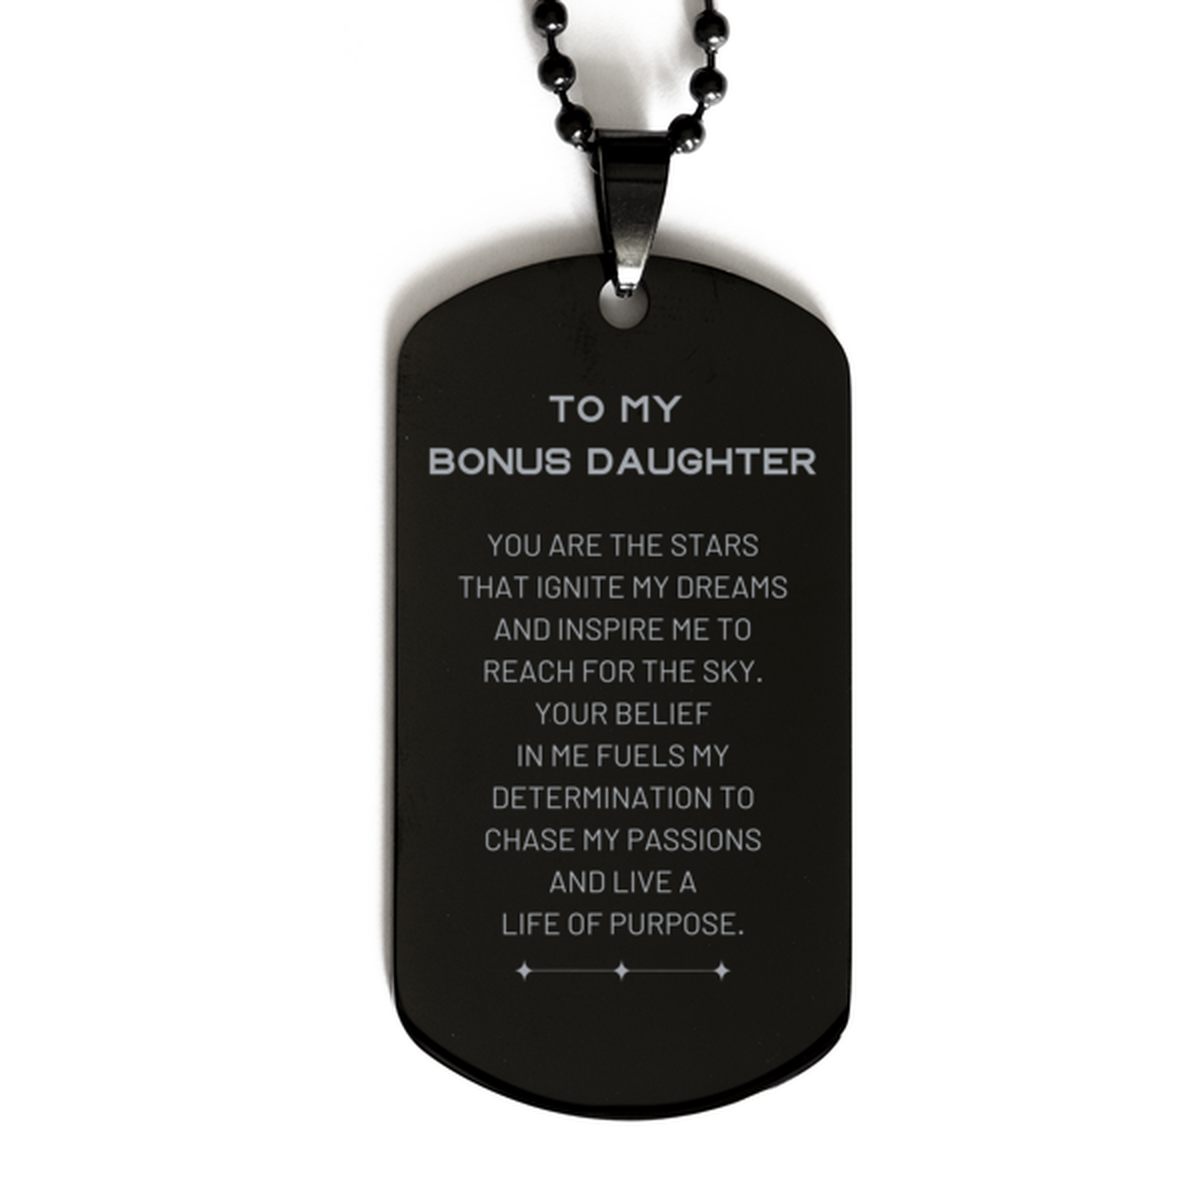 To My Bonus Daughter Black Dog Tag, You are the stars that ignite my dreams and inspire me to reach for the sky, Birthday Unique Gifts For Bonus Daughter, Thank You Gifts For Bonus Daughter